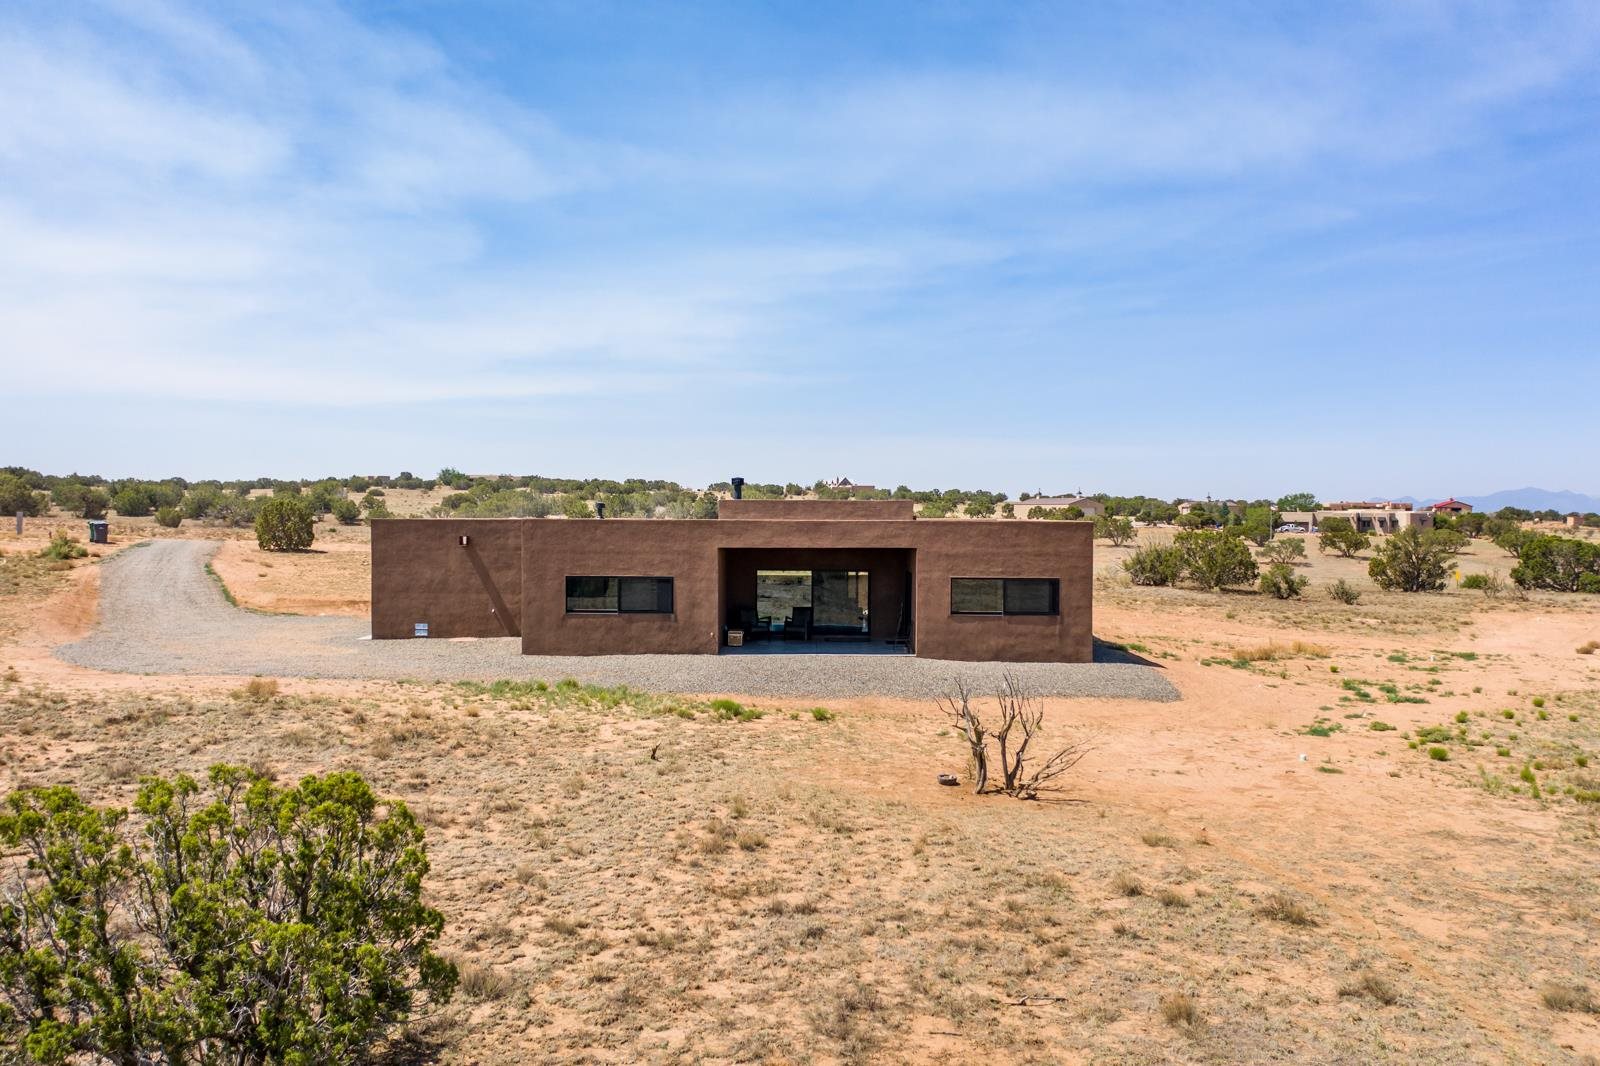 41 SPUR, Lamy, New Mexico 87540, 3 Bedrooms Bedrooms, ,2 BathroomsBathrooms,Residential,For Sale,41 SPUR,202102588